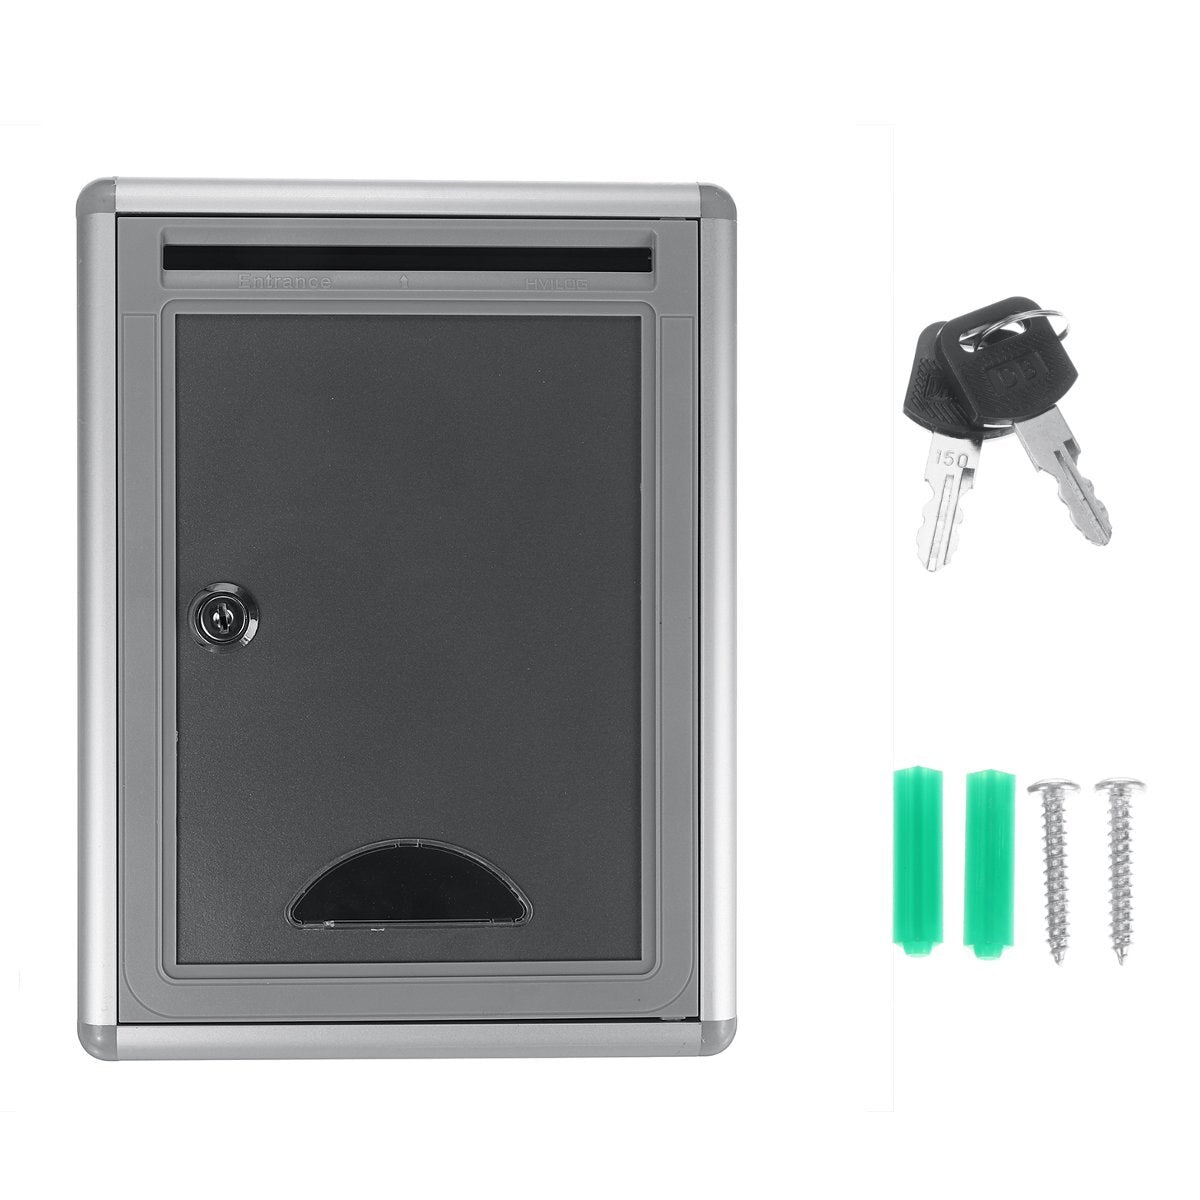 Wall Mounted Residential House Locking Mail Box - Westfield Retailers